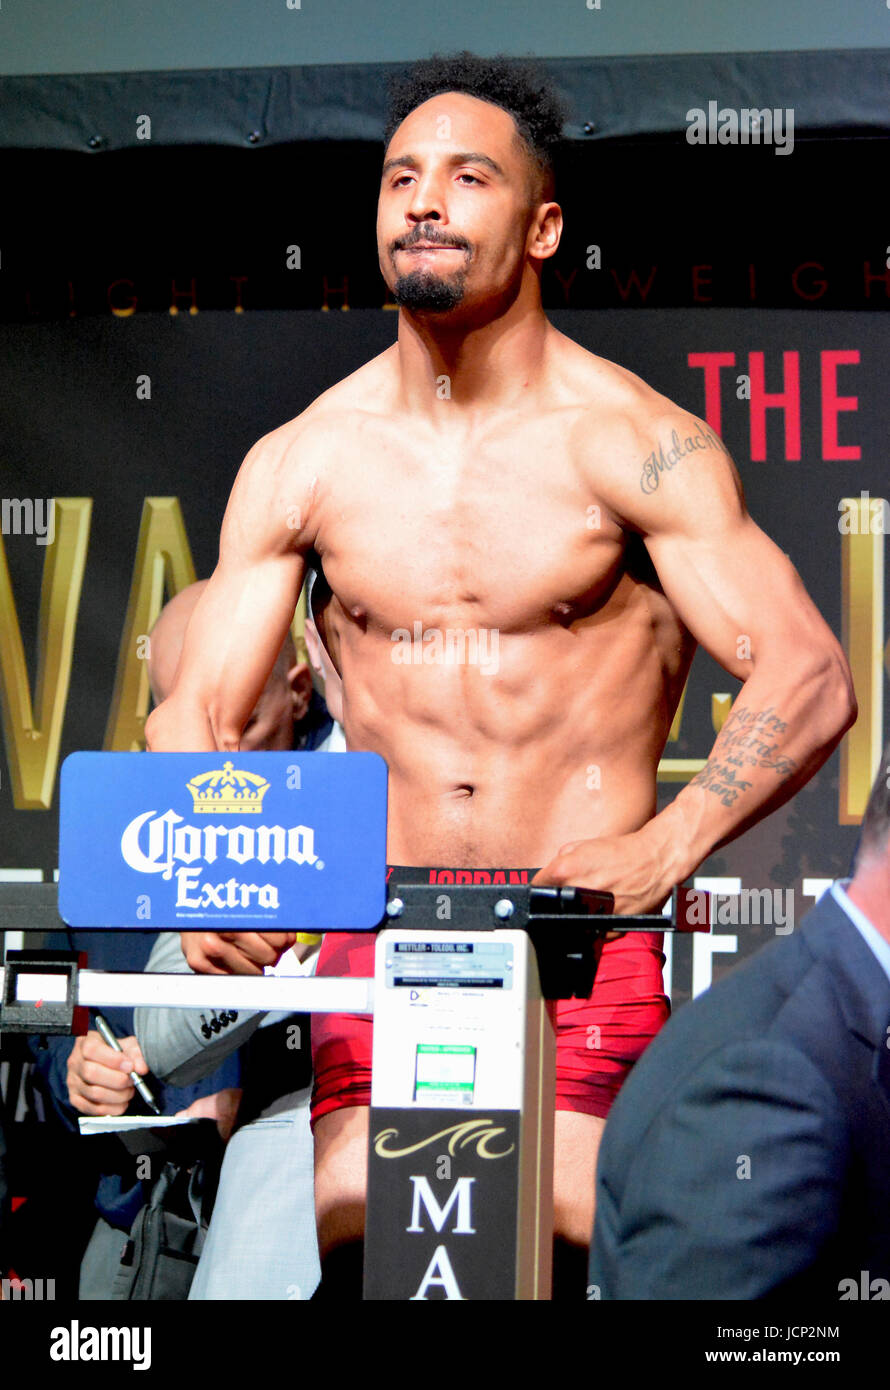 Las Vegas, Nevada, USA. 16th June, 2017. WBA, WBC and IBF Light Heavyweight Boxing World Champion Andre Ward attends the weigh-in ceremony on June 16, 2017 at Mandalay Bay Events center for the upcoming Ward vs Kovalev rematch in Las Vegas, Nevada. Credit: Marcel Thomas/ZUMA Wire/Alamy Live News Stock Photo